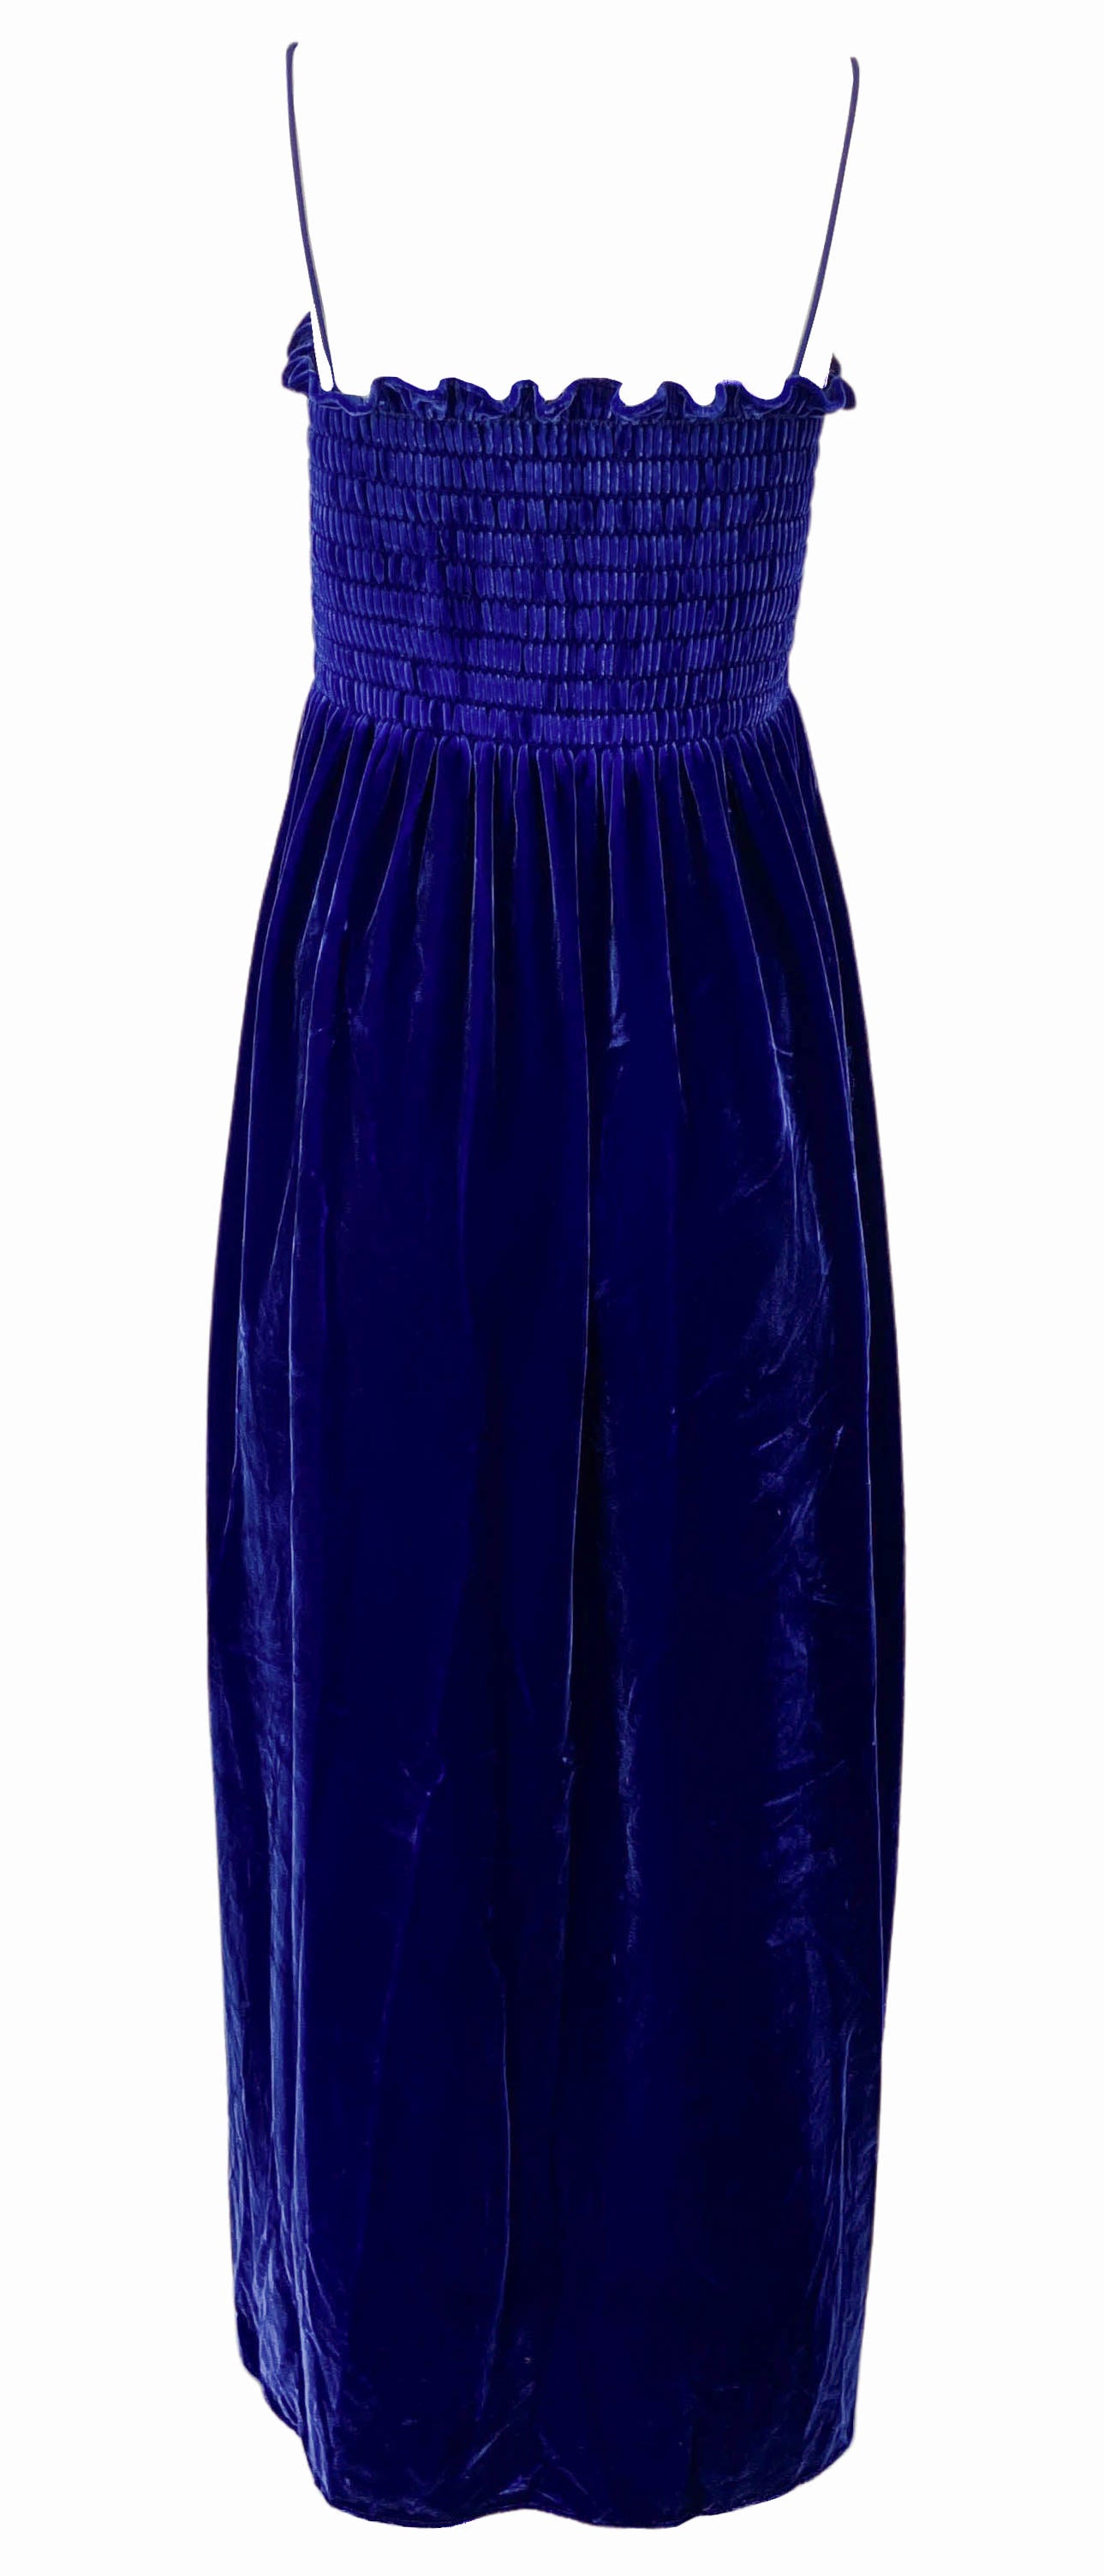 Gucci Velvet Maxi Dress in Navy Blue - Discounts on Gucci at UAL